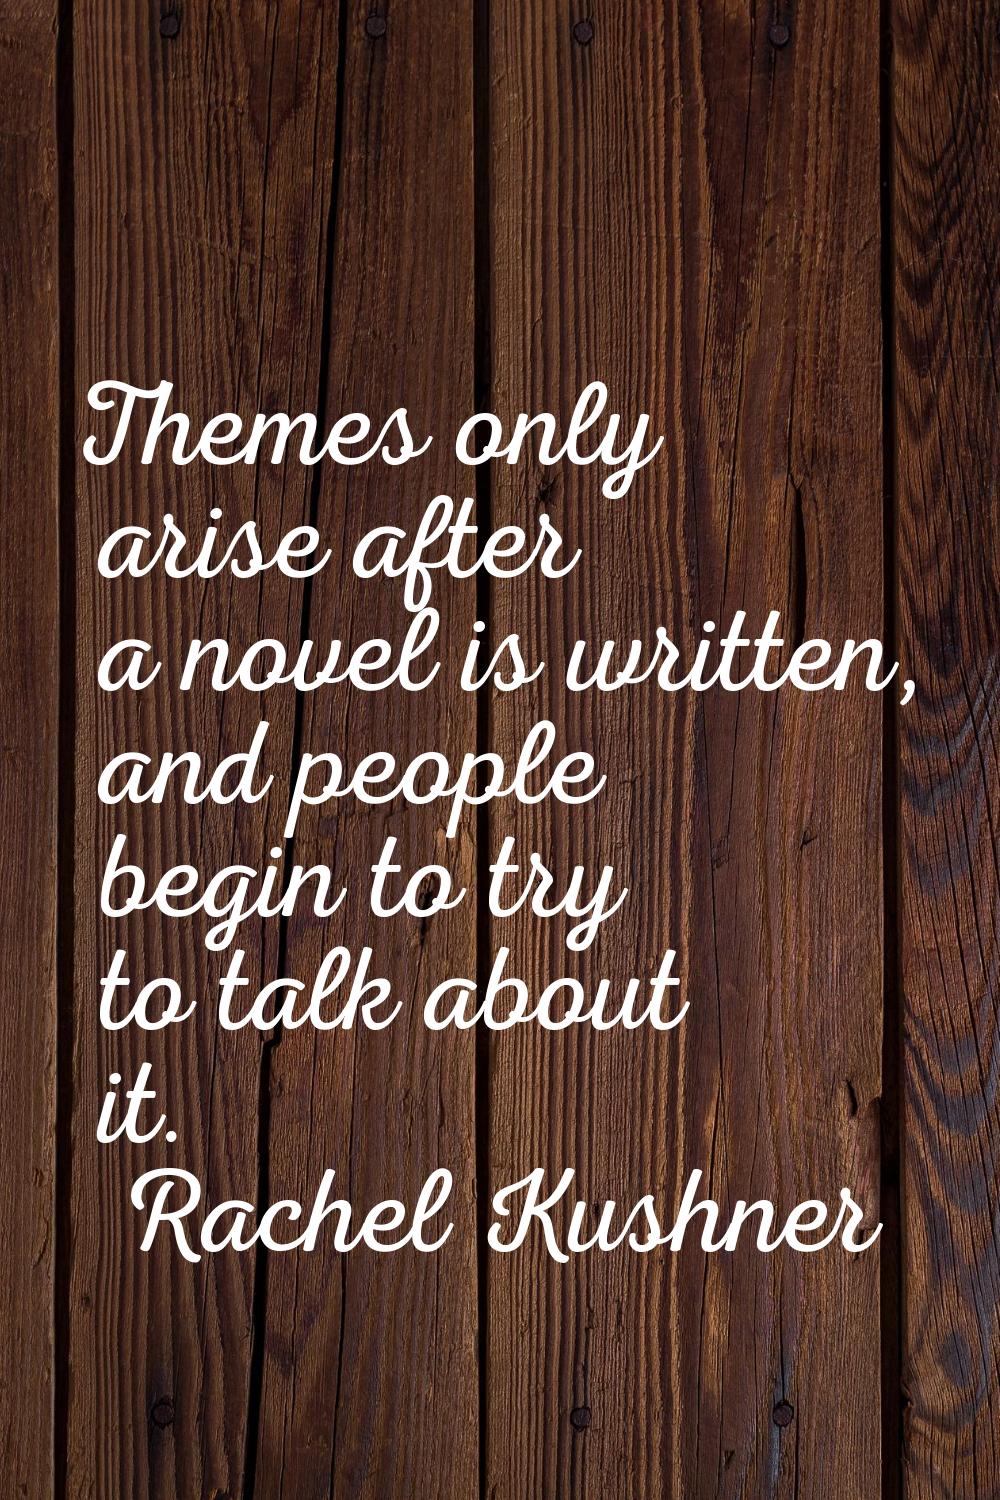 Themes only arise after a novel is written, and people begin to try to talk about it.